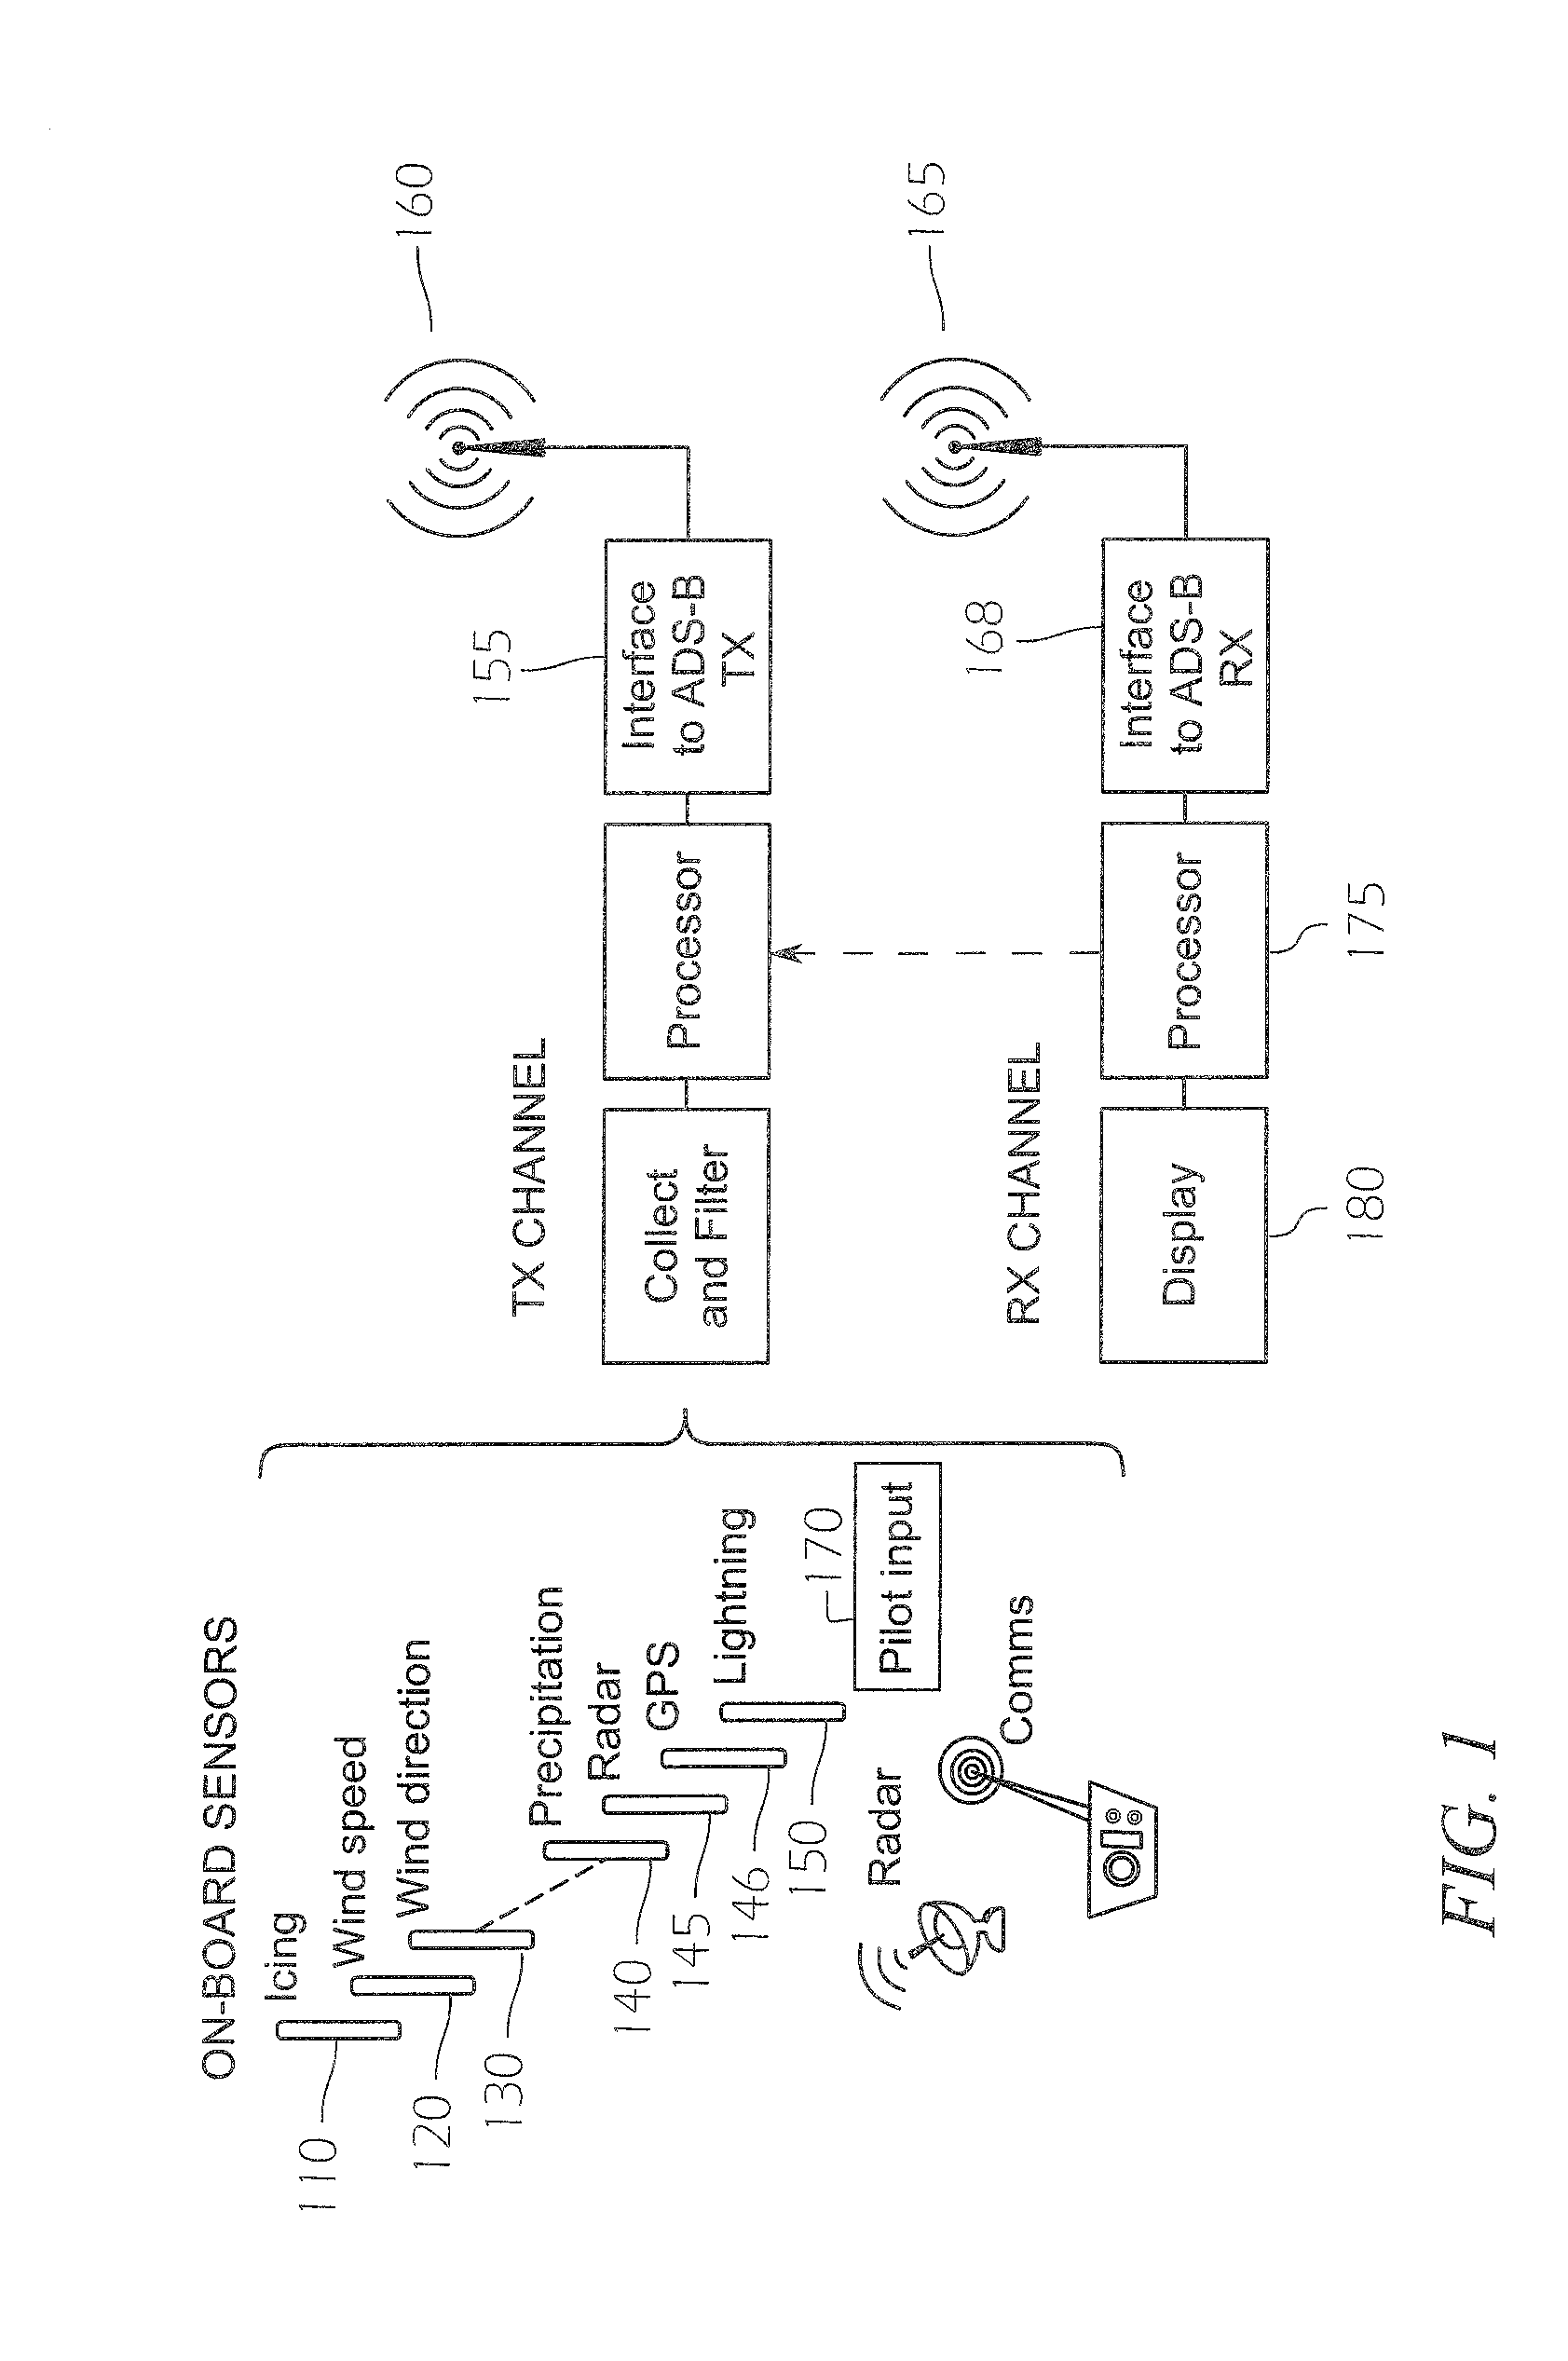 System and method for social networking of aircraft for information exchange